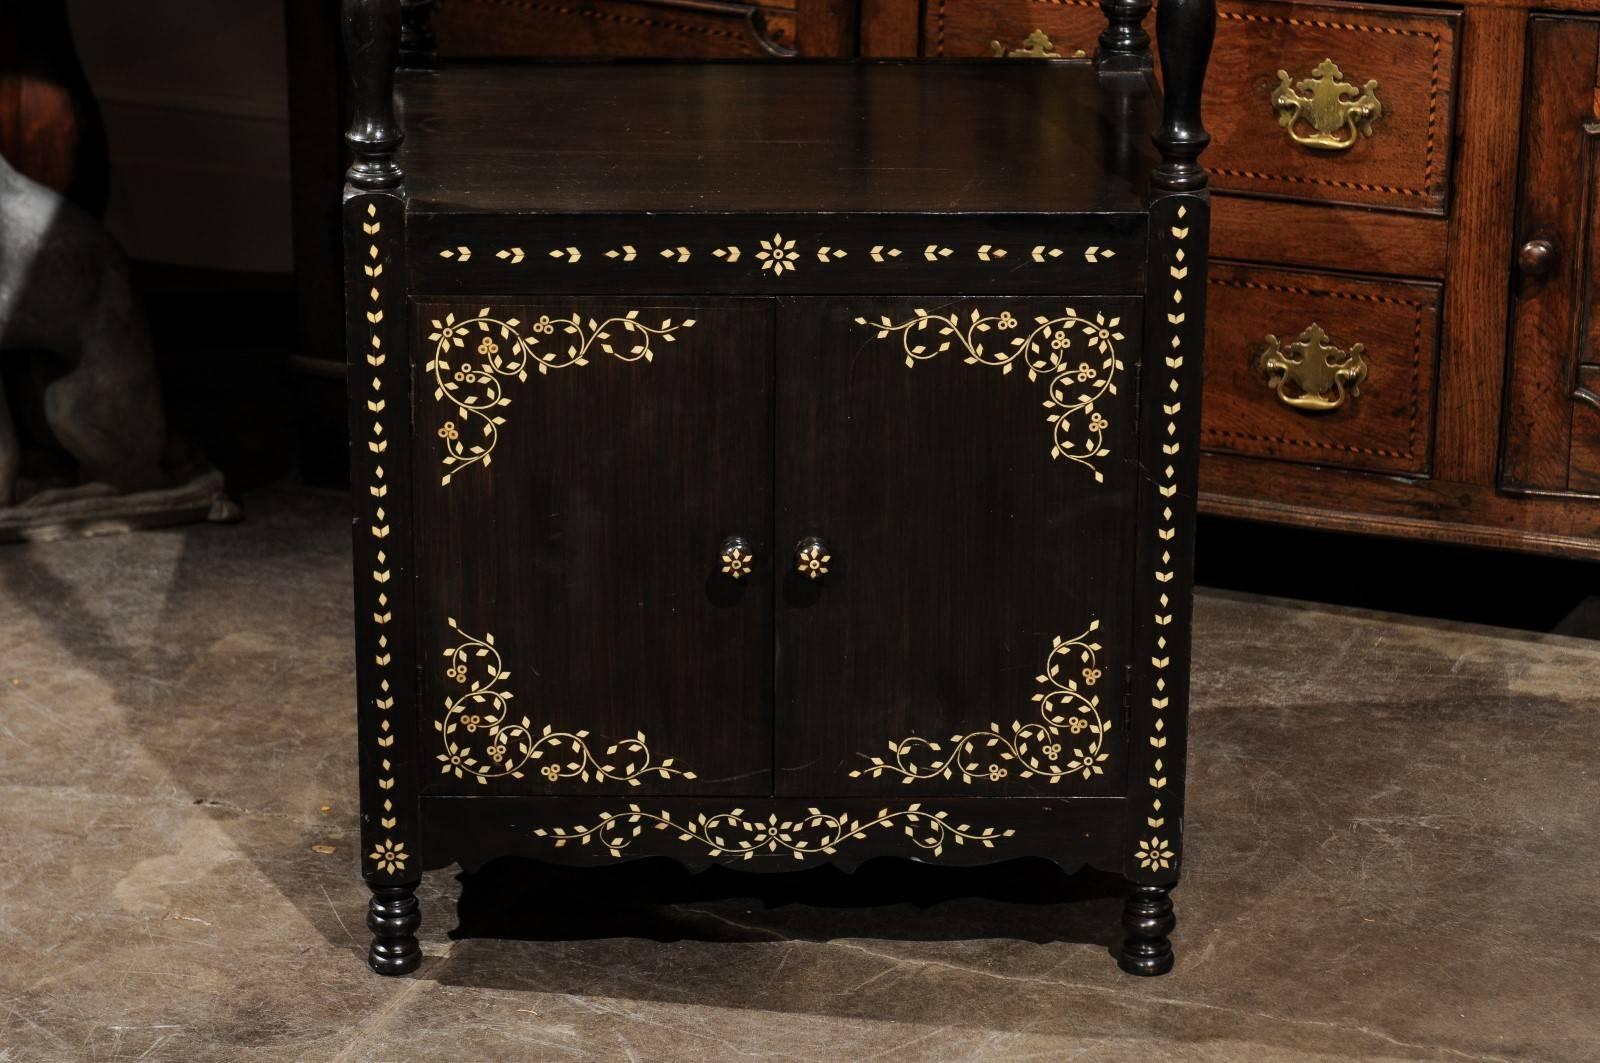 Ebonized Wood Etagère with Floral Bone Inlay Decor from the Early 19th Century 4